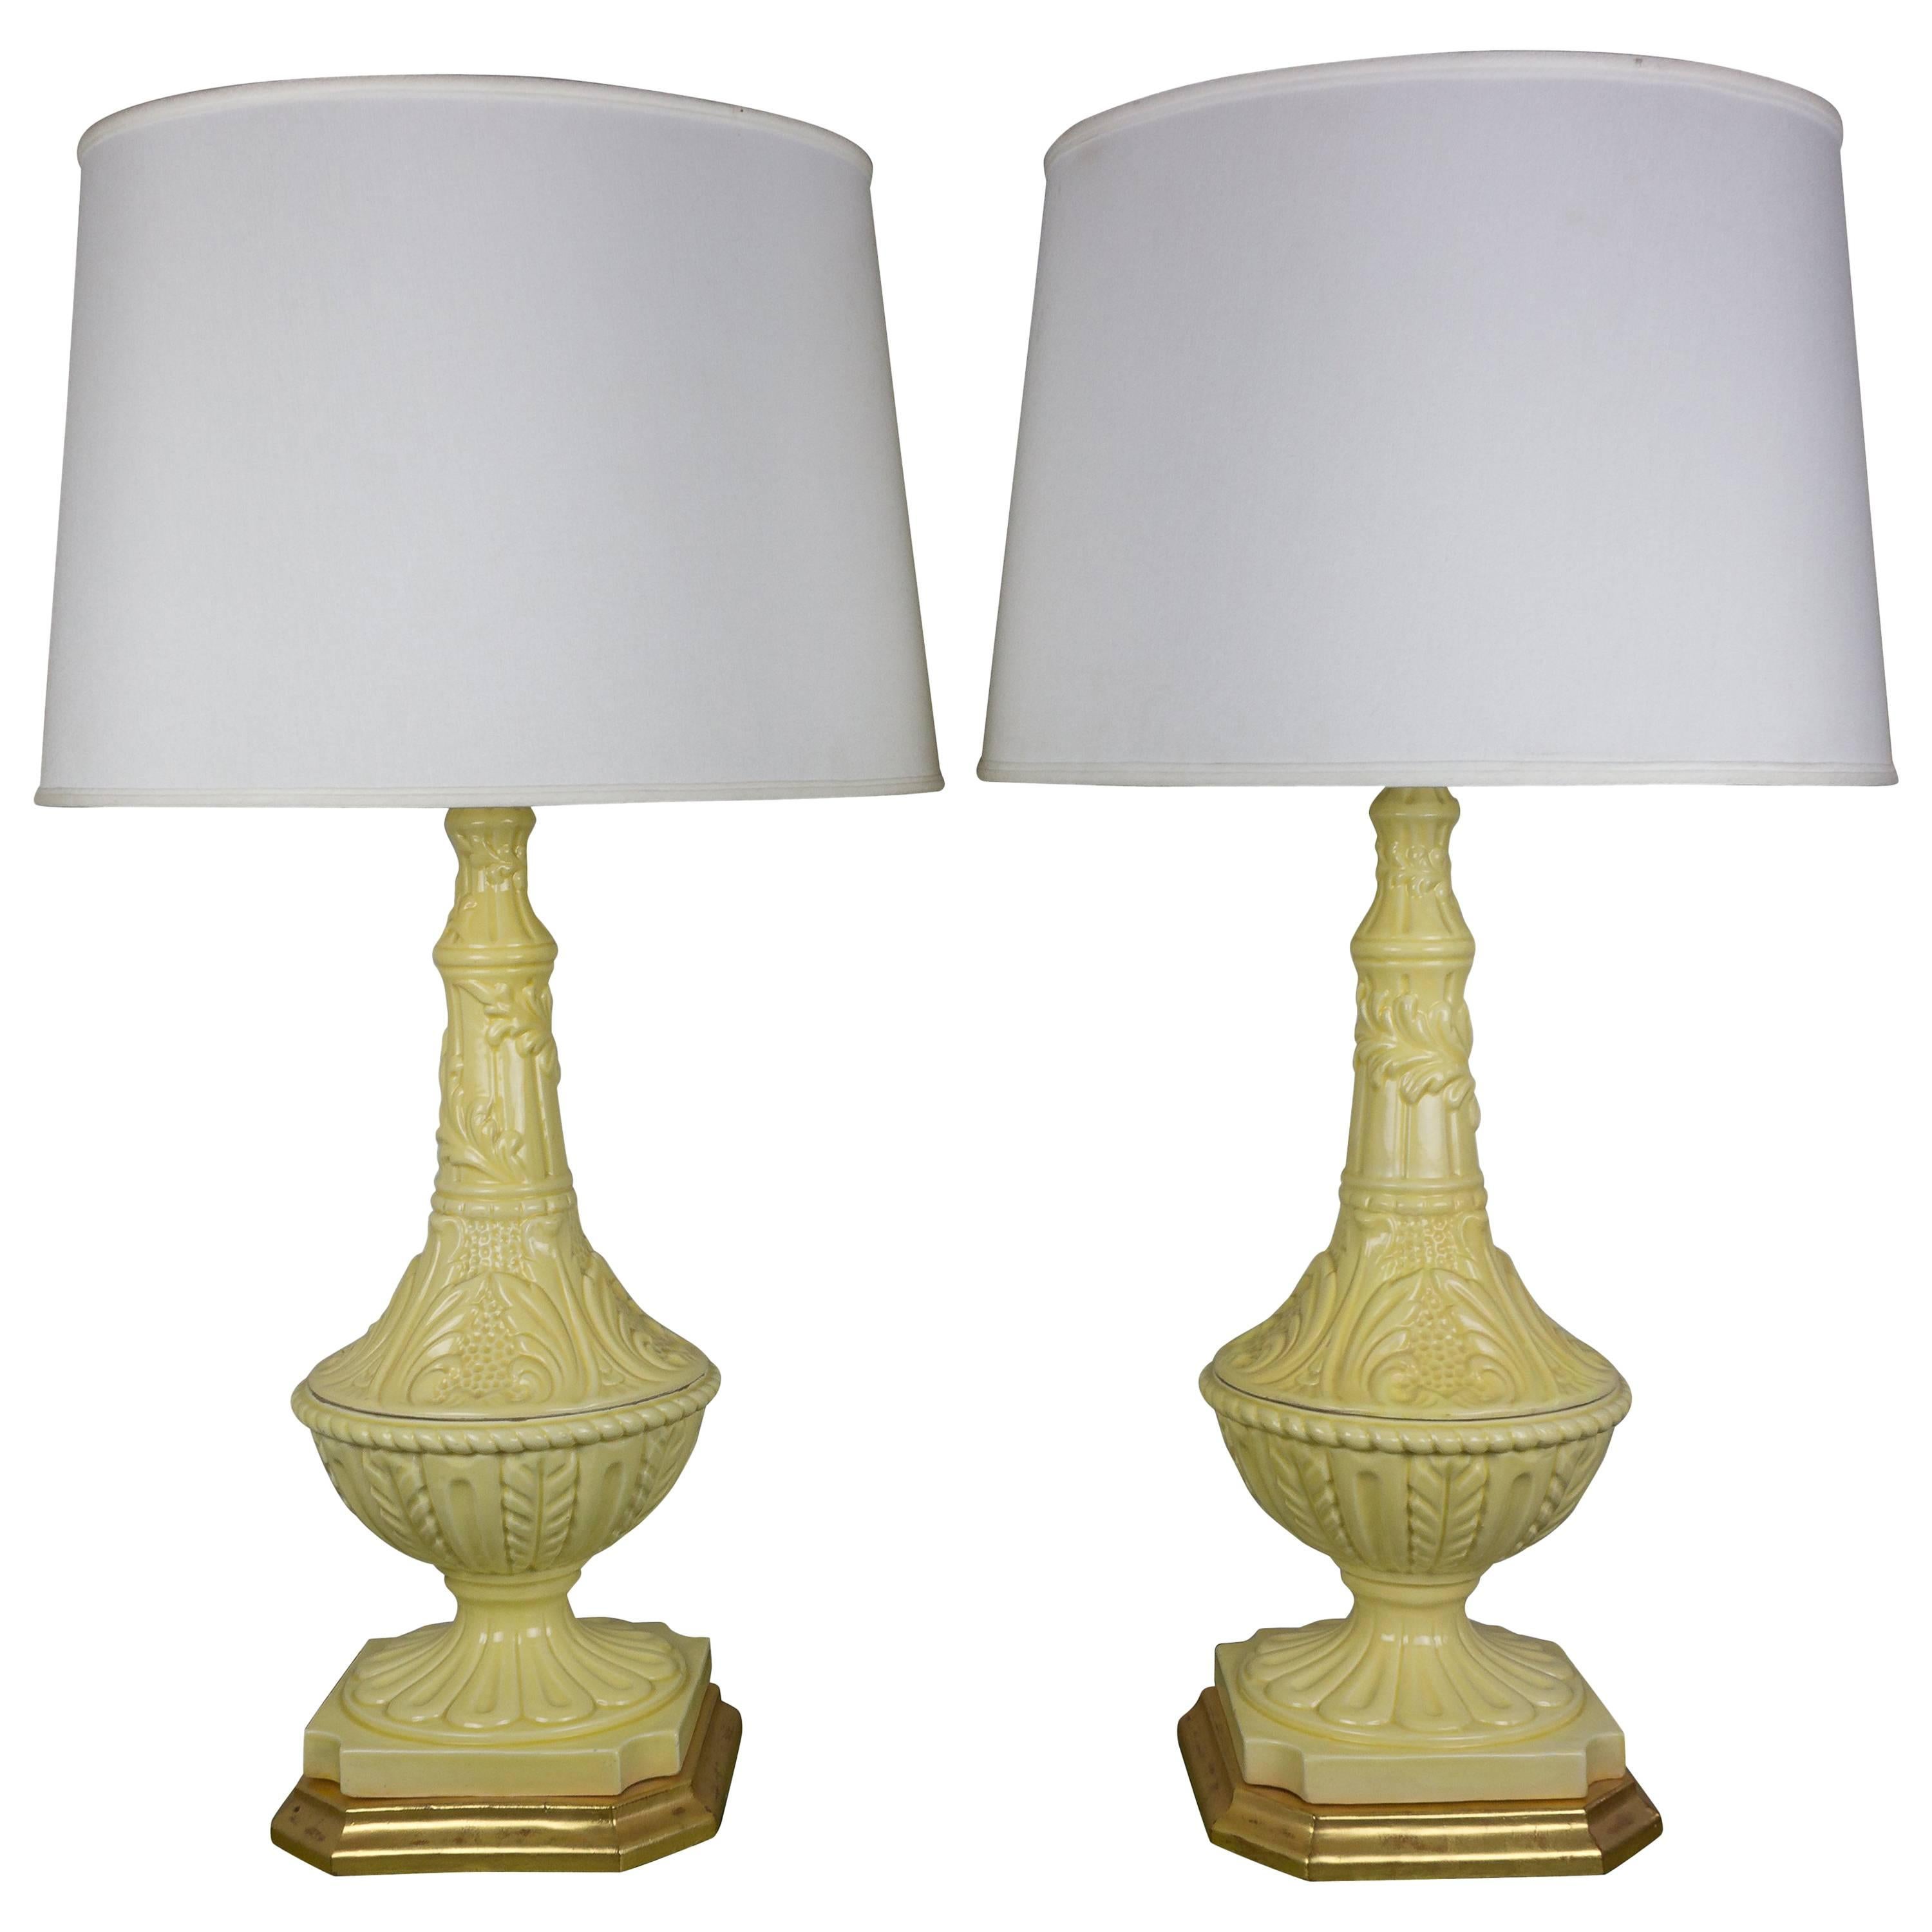 Pair of Spanish Yellow Ceramic Lamps with Gilt Bases